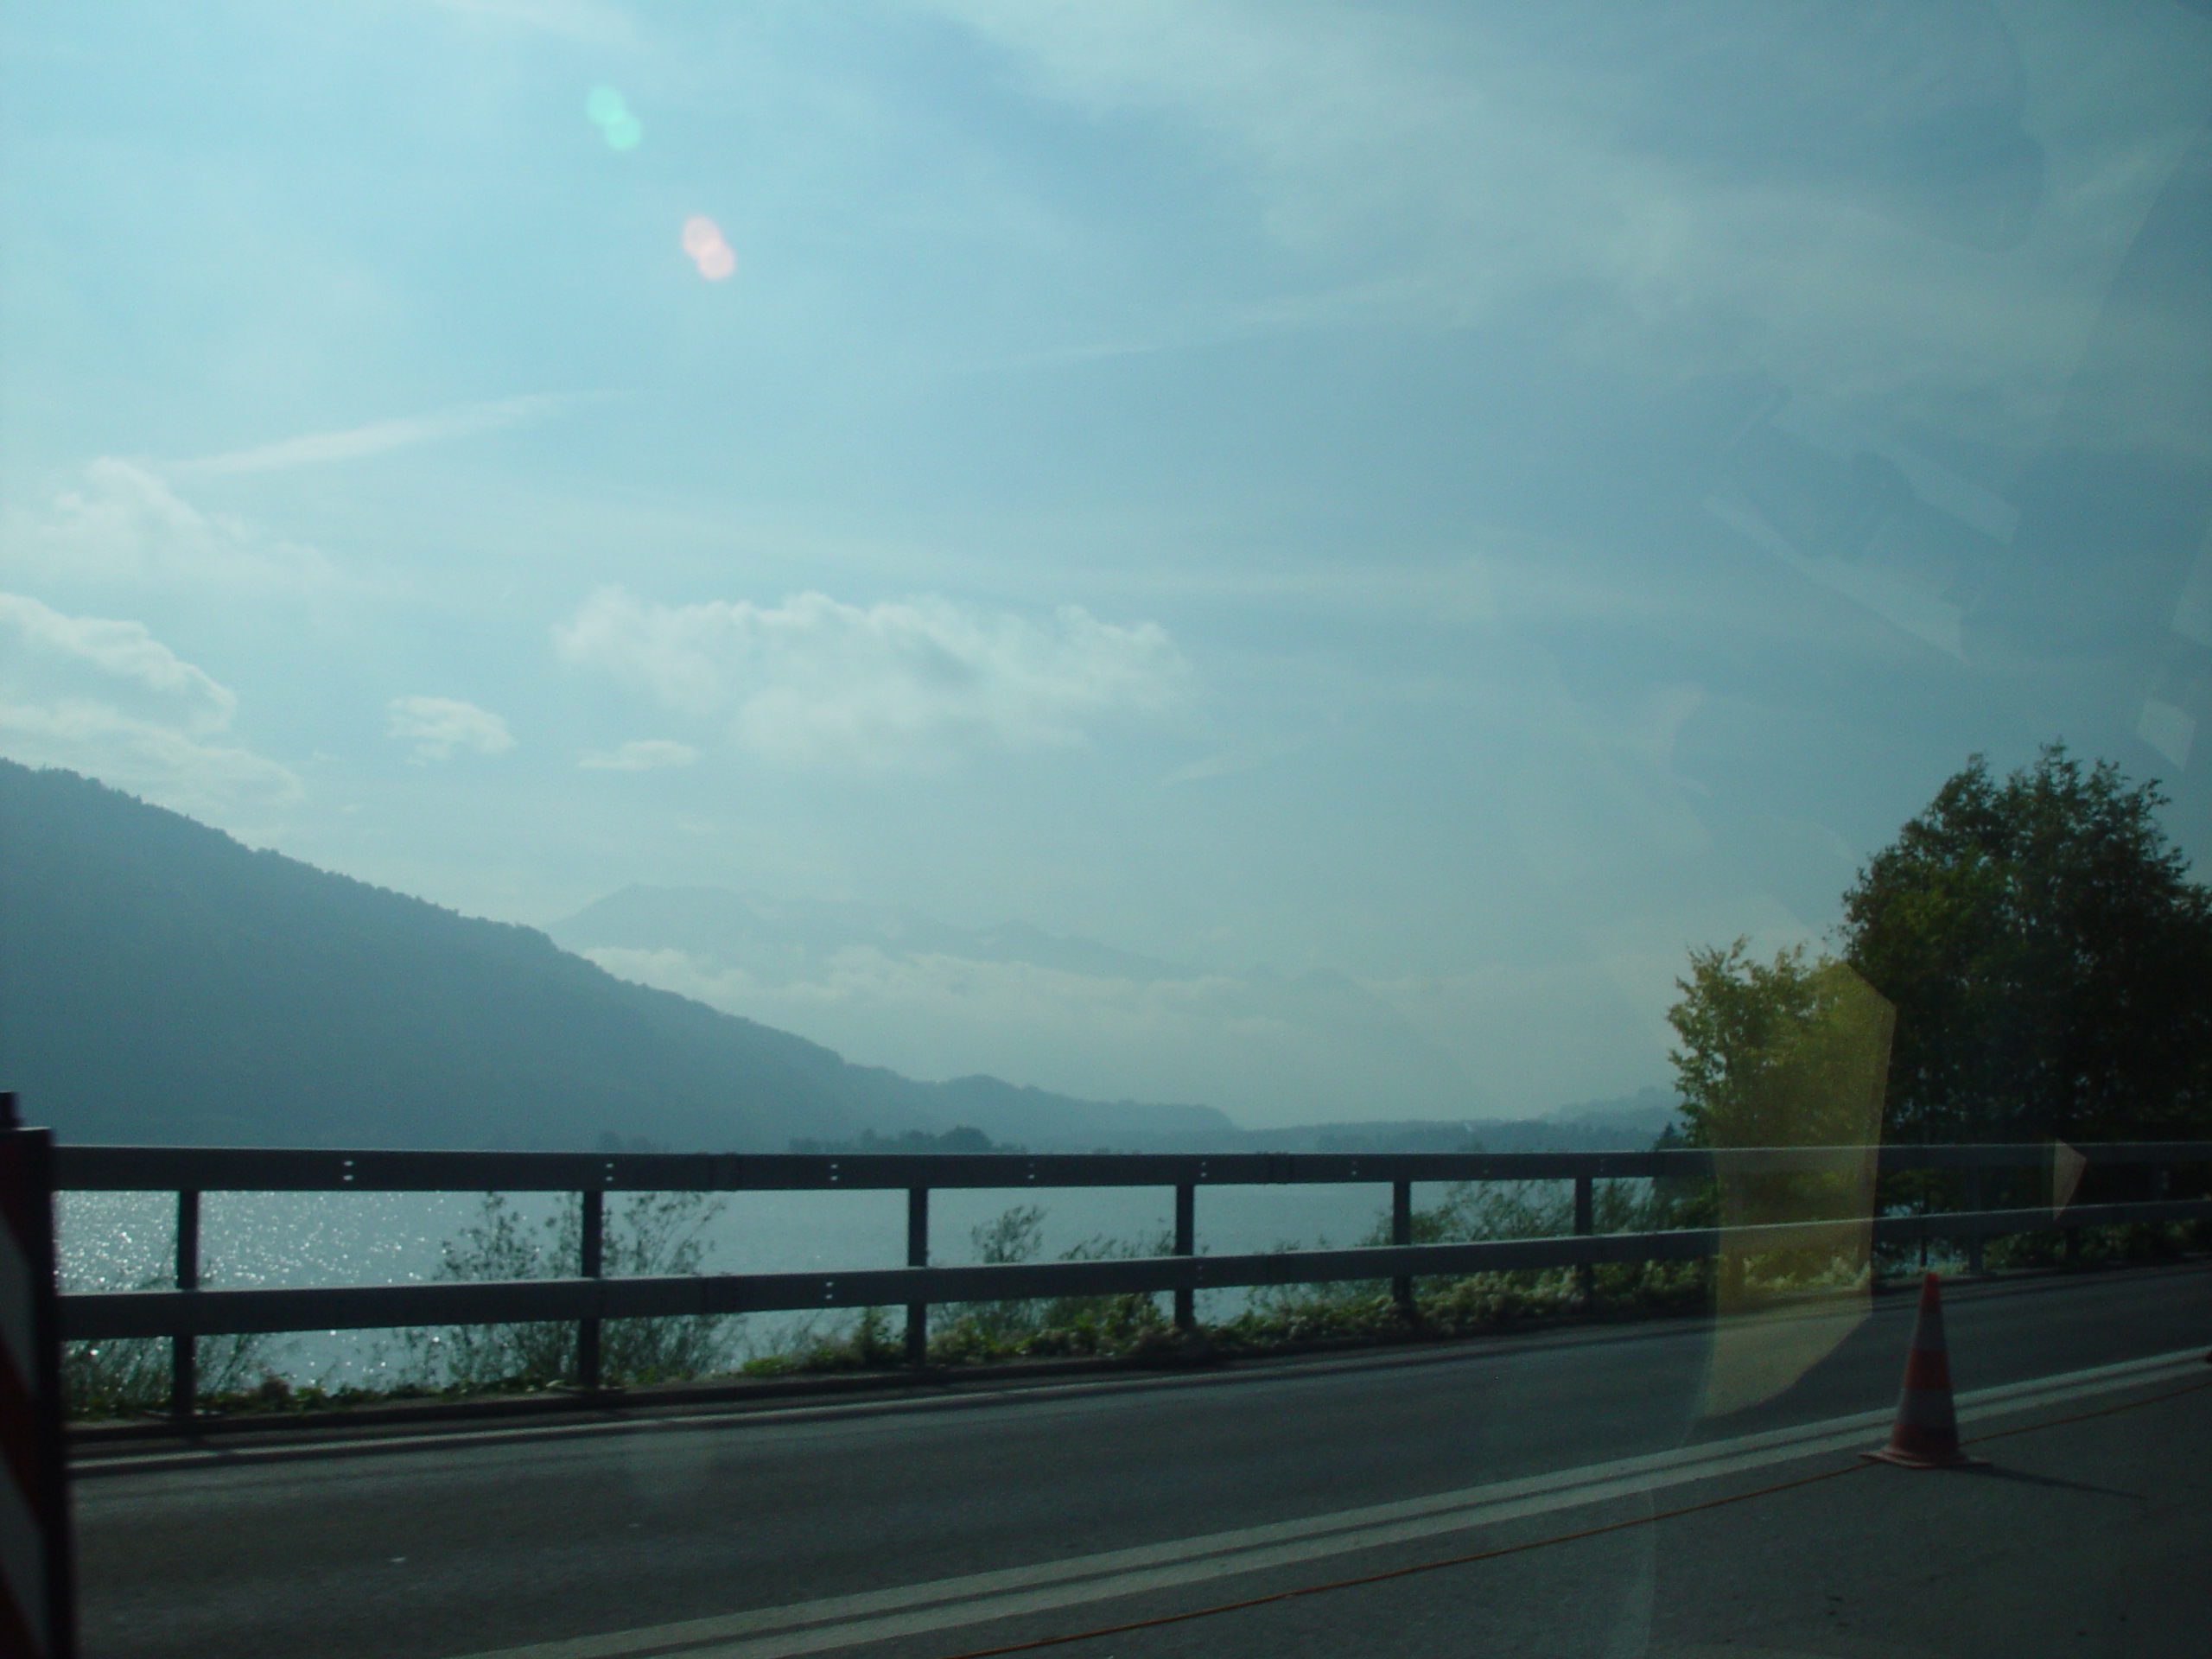 Europe Trip 2005 - Switzerland (Driving into the Alps)